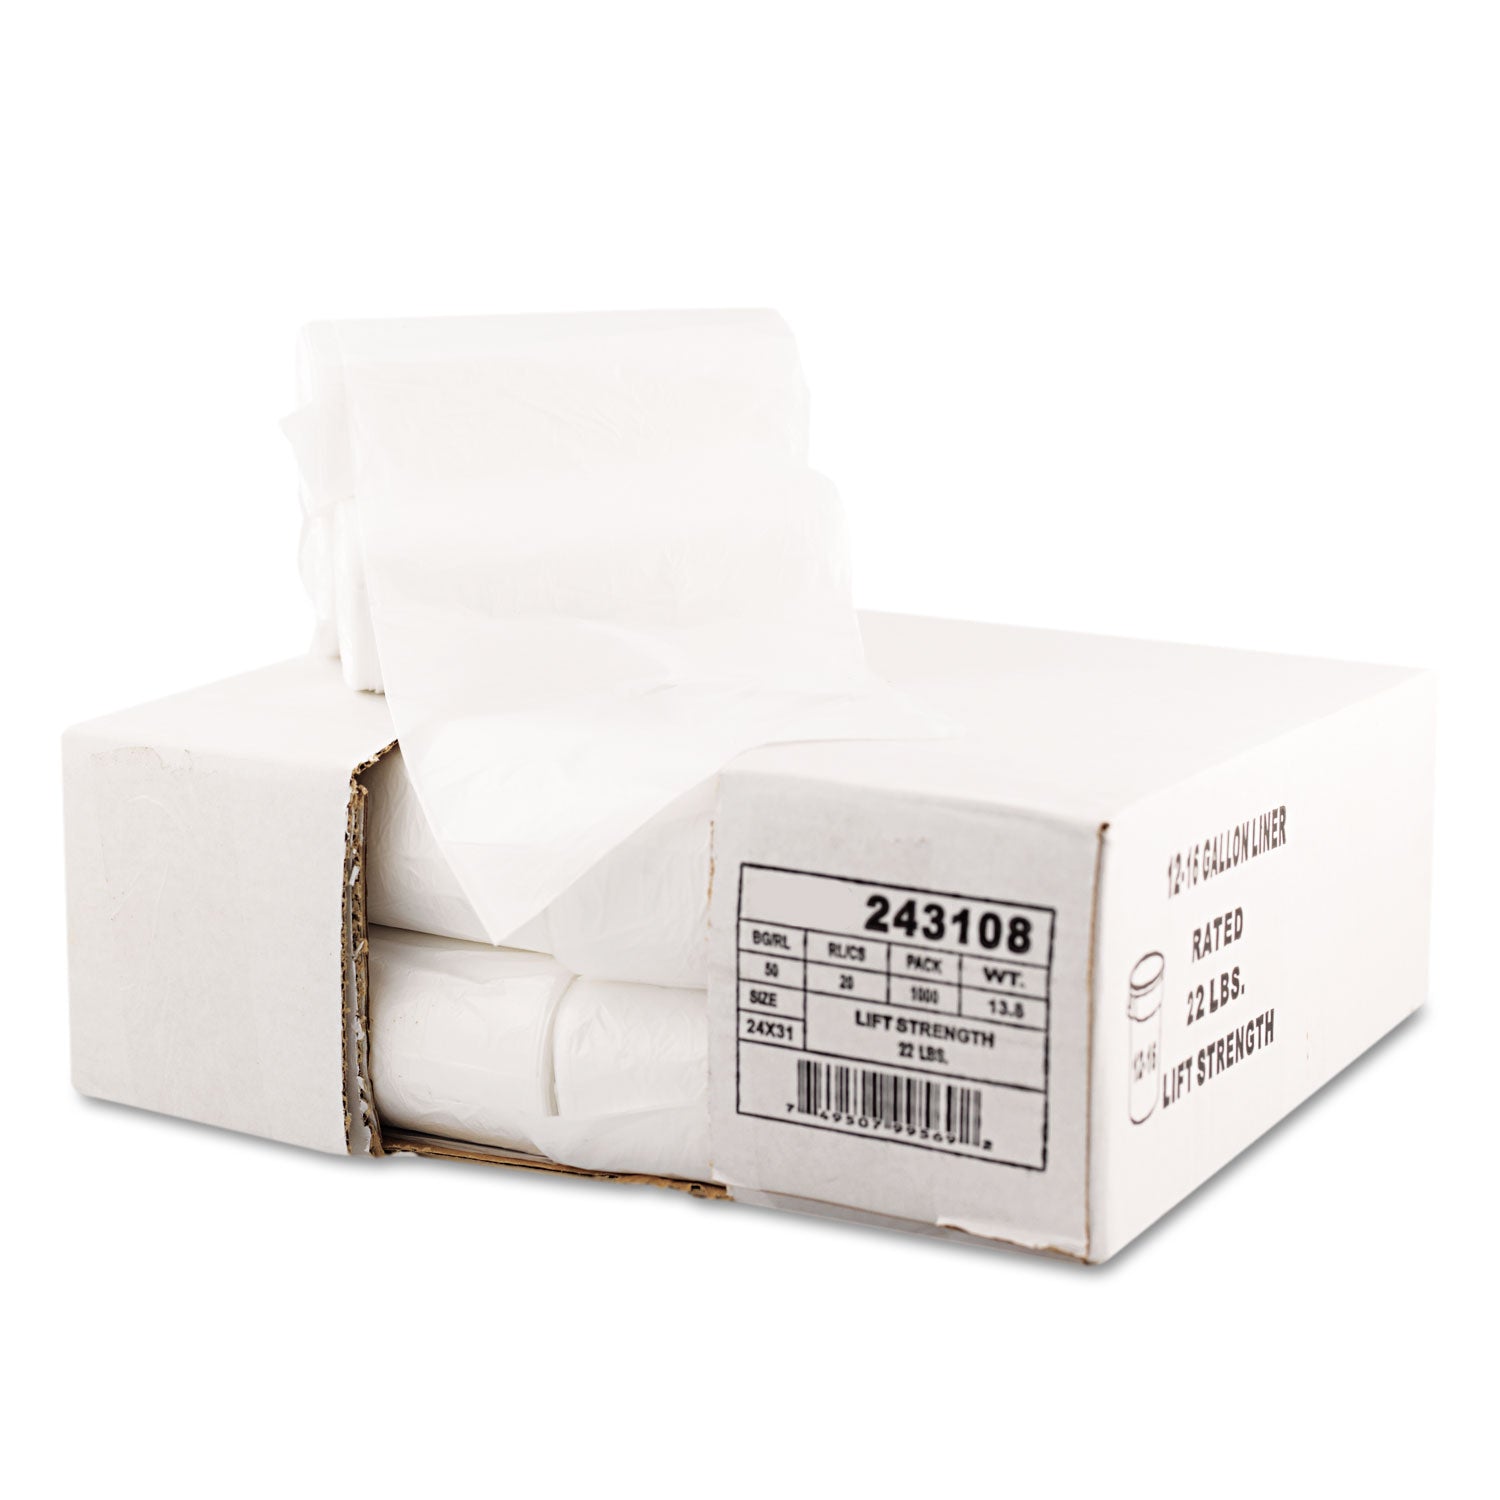 high-density-can-liners-16-gal-7-mic-24-x-31-natural-50-bags-roll-20-rolls-carton_bwk243108 - 2